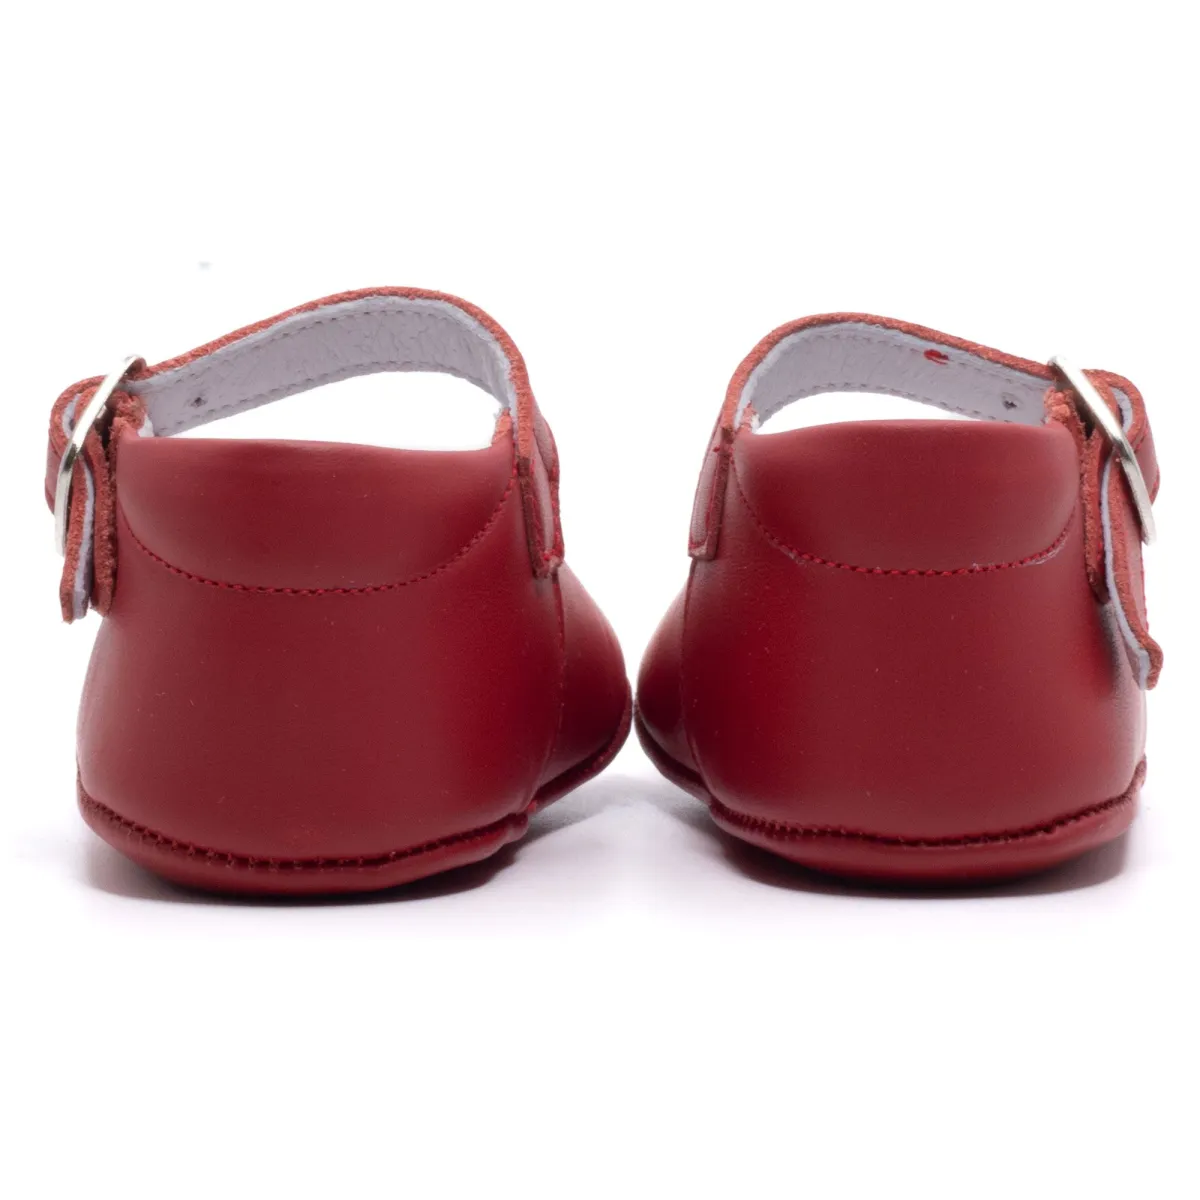 Boni Alix - Red Leather Girls Pre-walkers - 